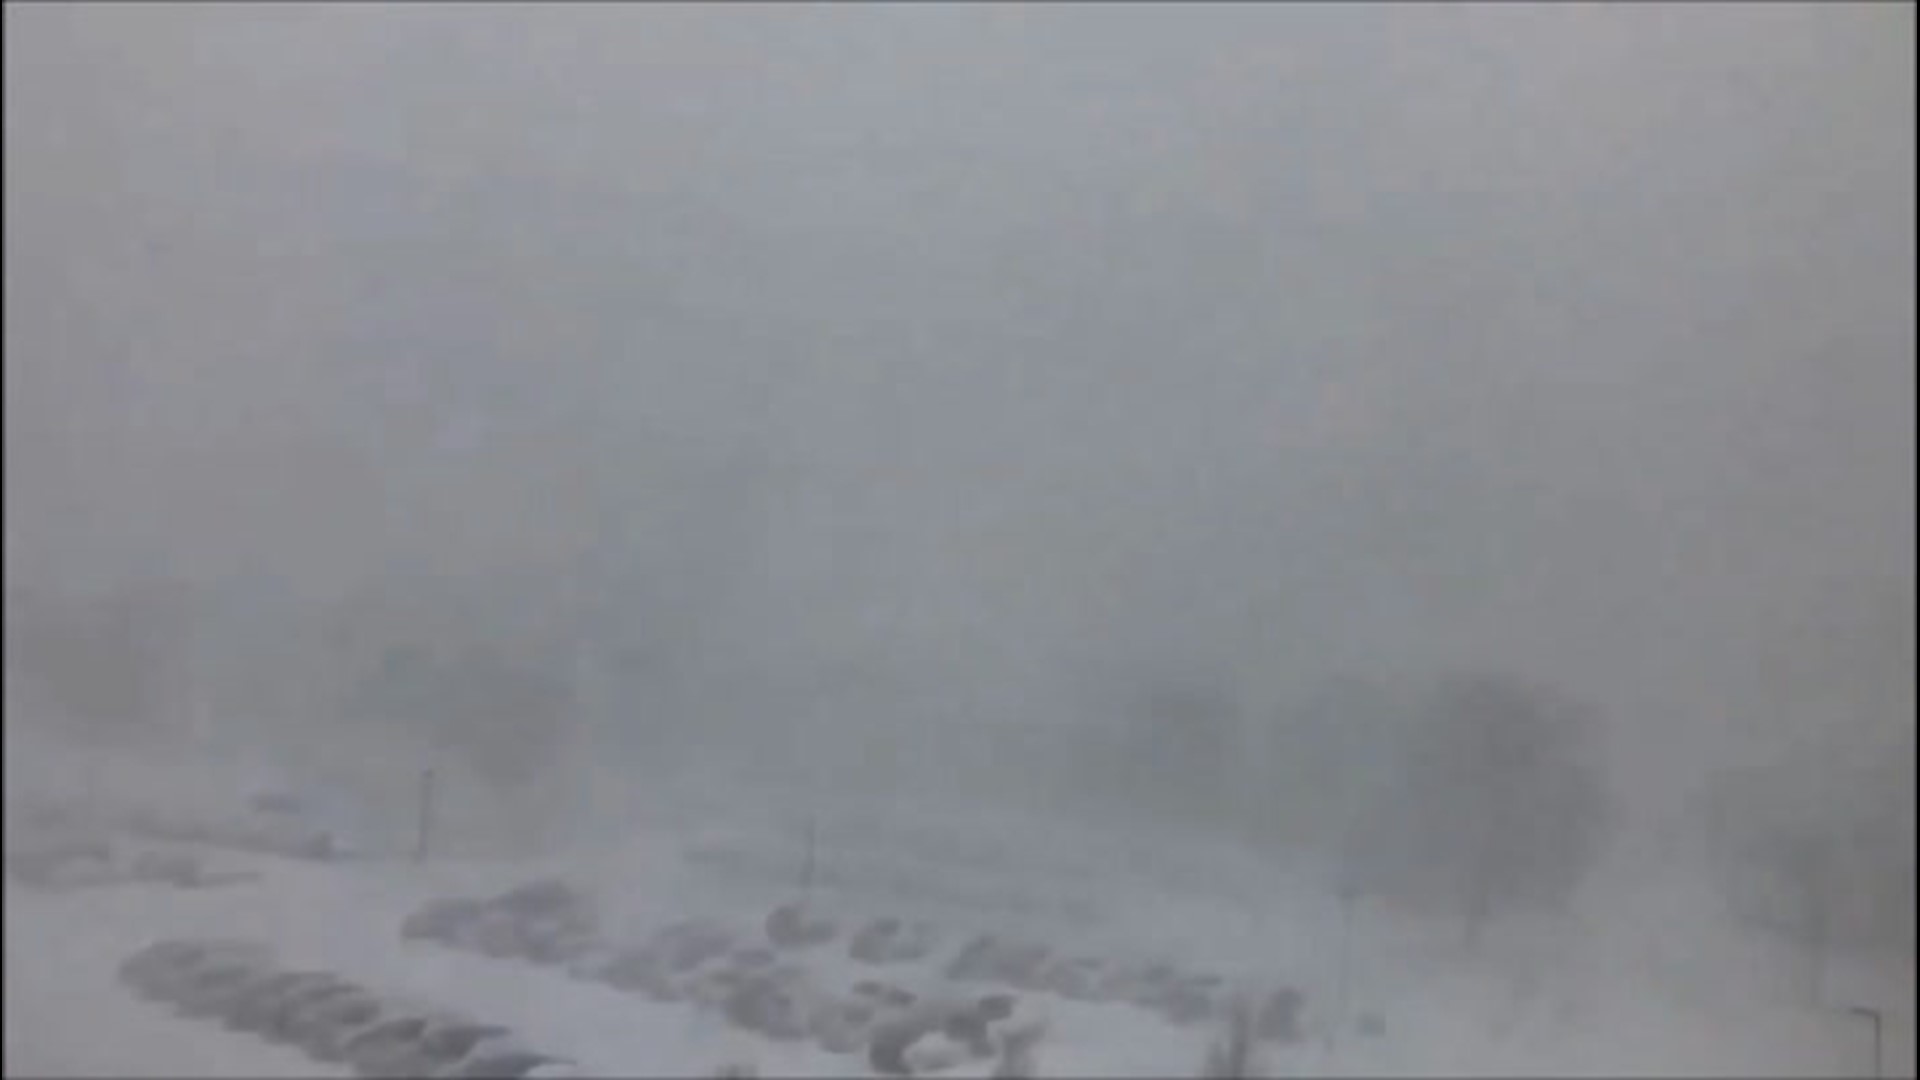 Lake-effect snow coming off Lake Ontario in Oswego, New York, created blizzard conditions, with close to zero visibility at times on Feb. 27.